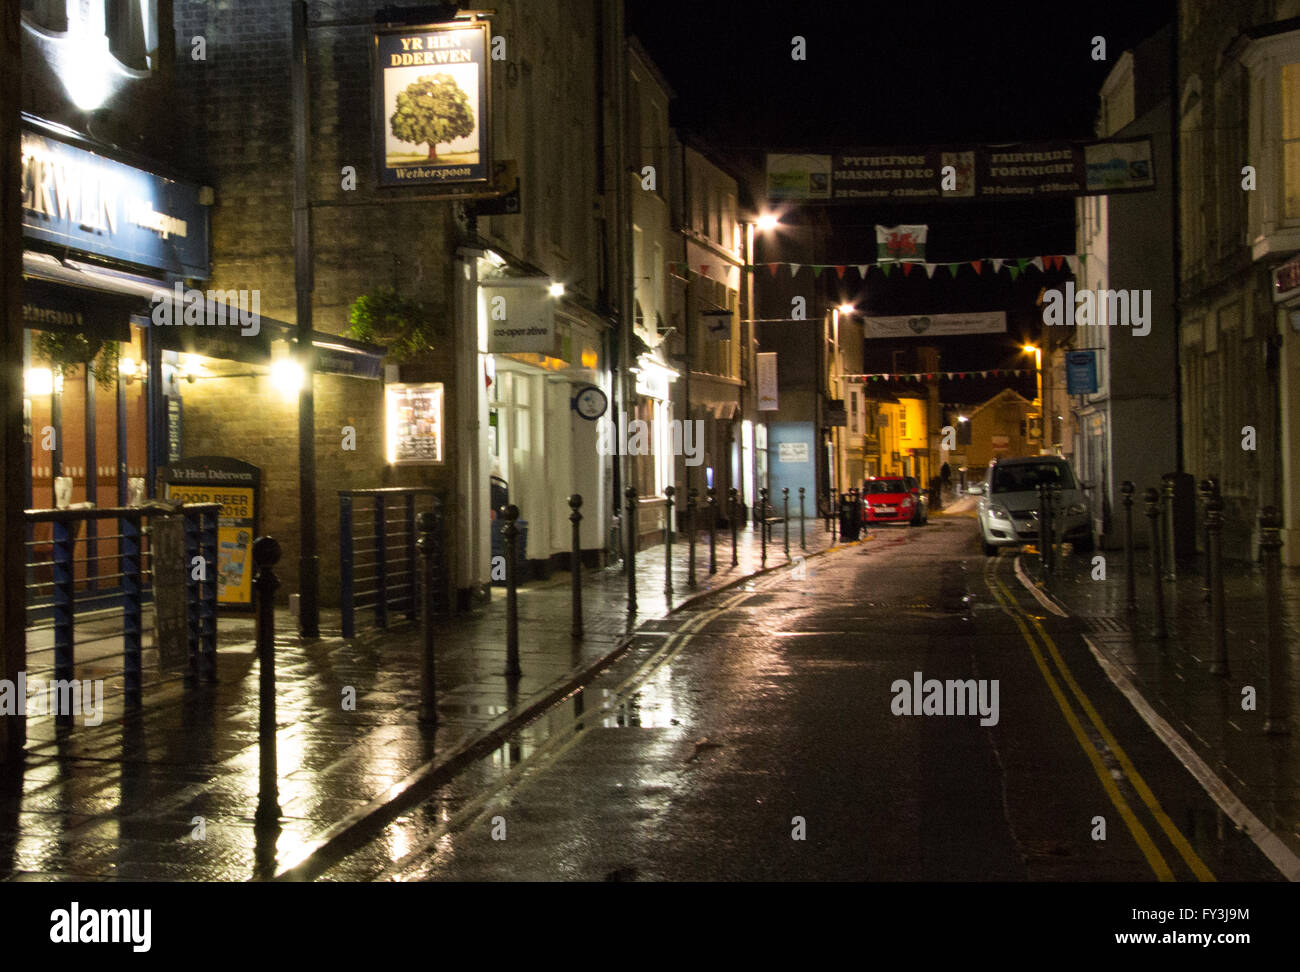 King Street, Carmarthen on a cold wet evening.  The shoppers had gone home, the street was quiet, but the lights shone brightly. Stock Photo